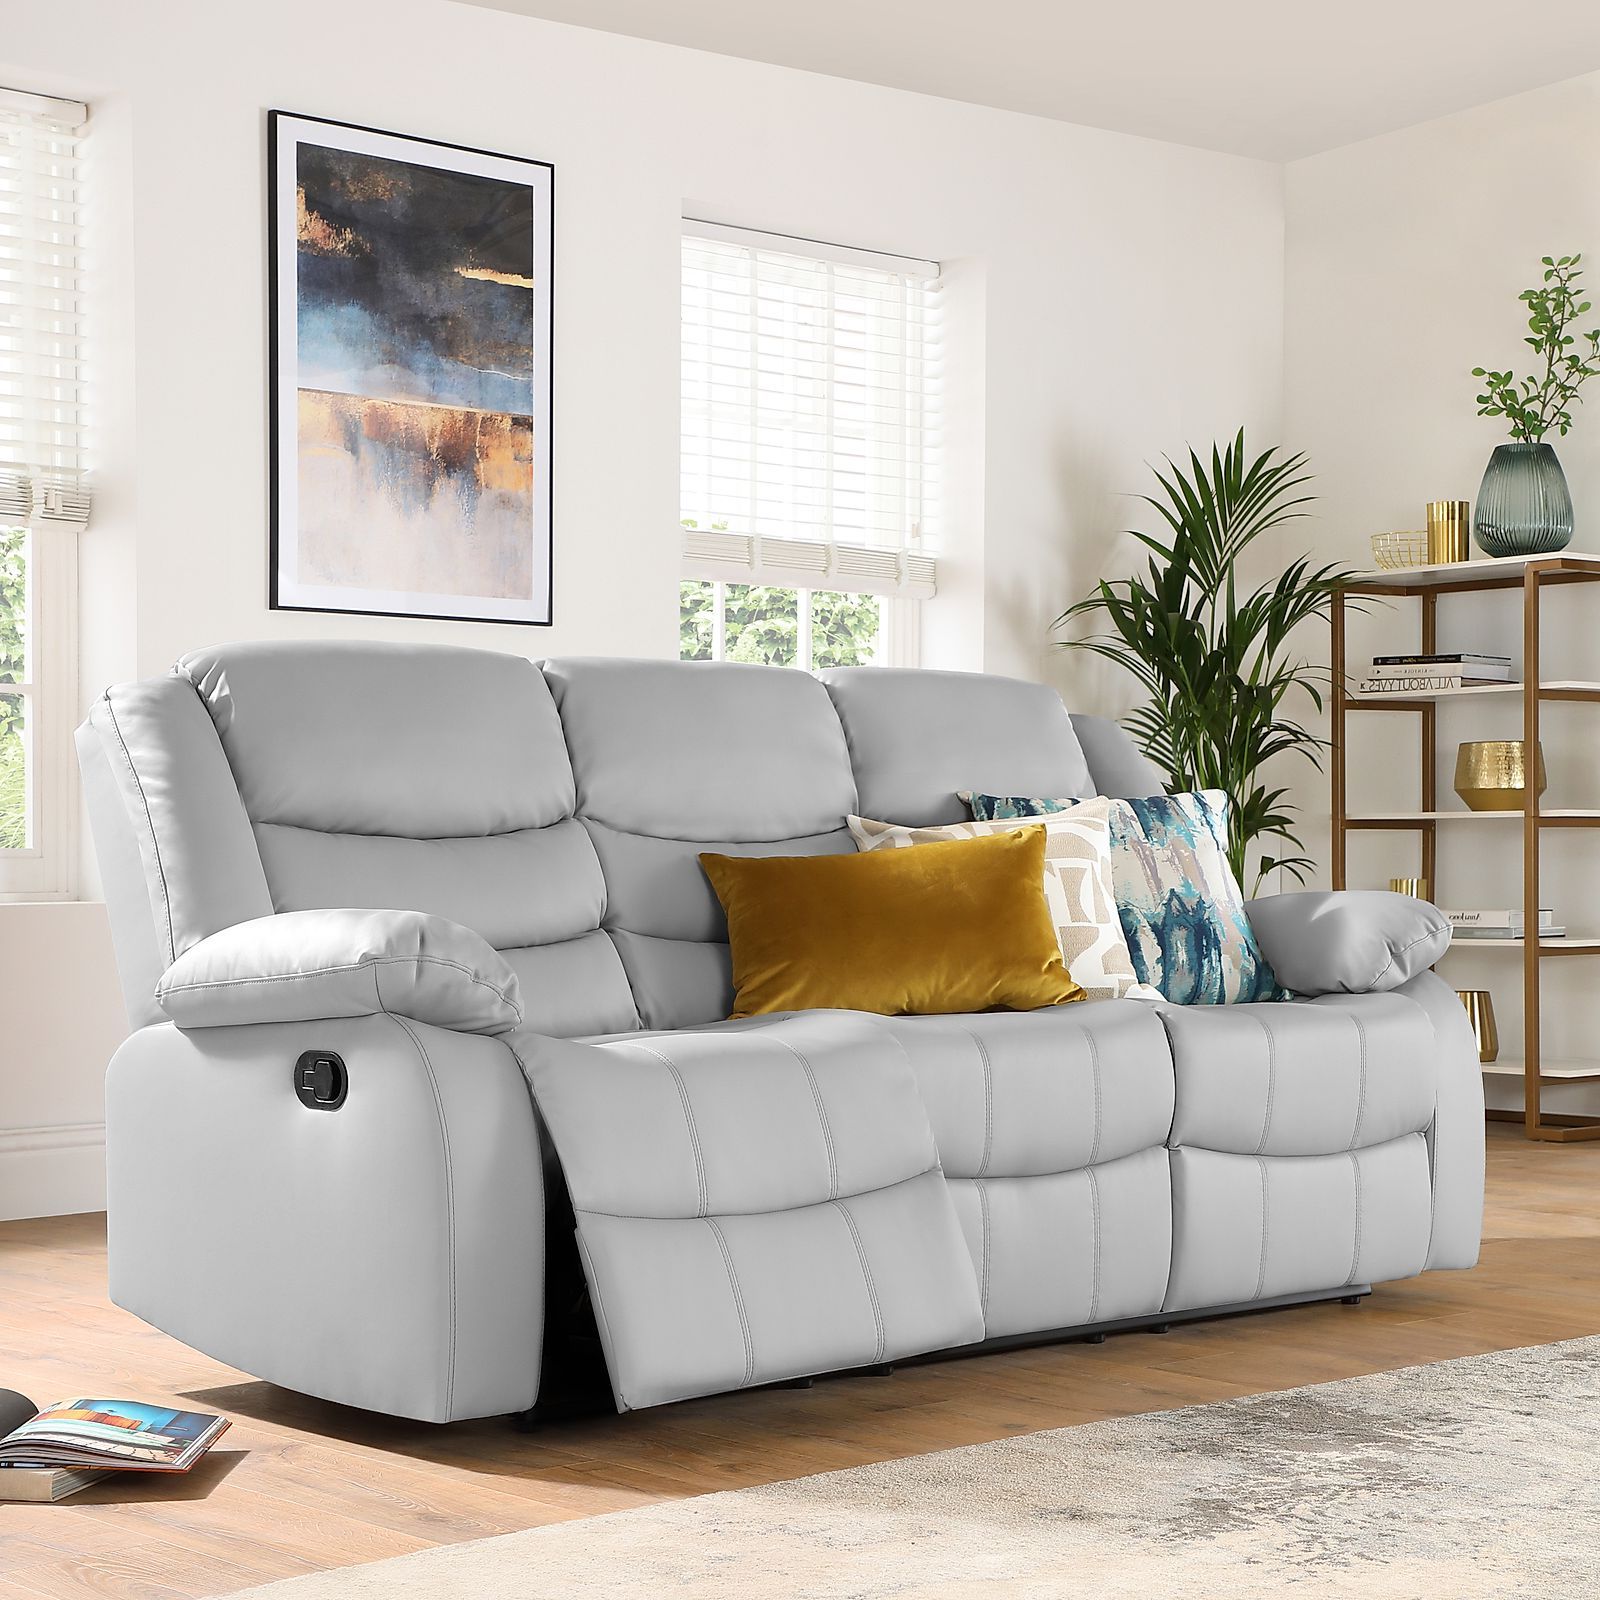 Furniture Choice Regarding Most Current Sofas In Light Gray (Photo 12 of 15)